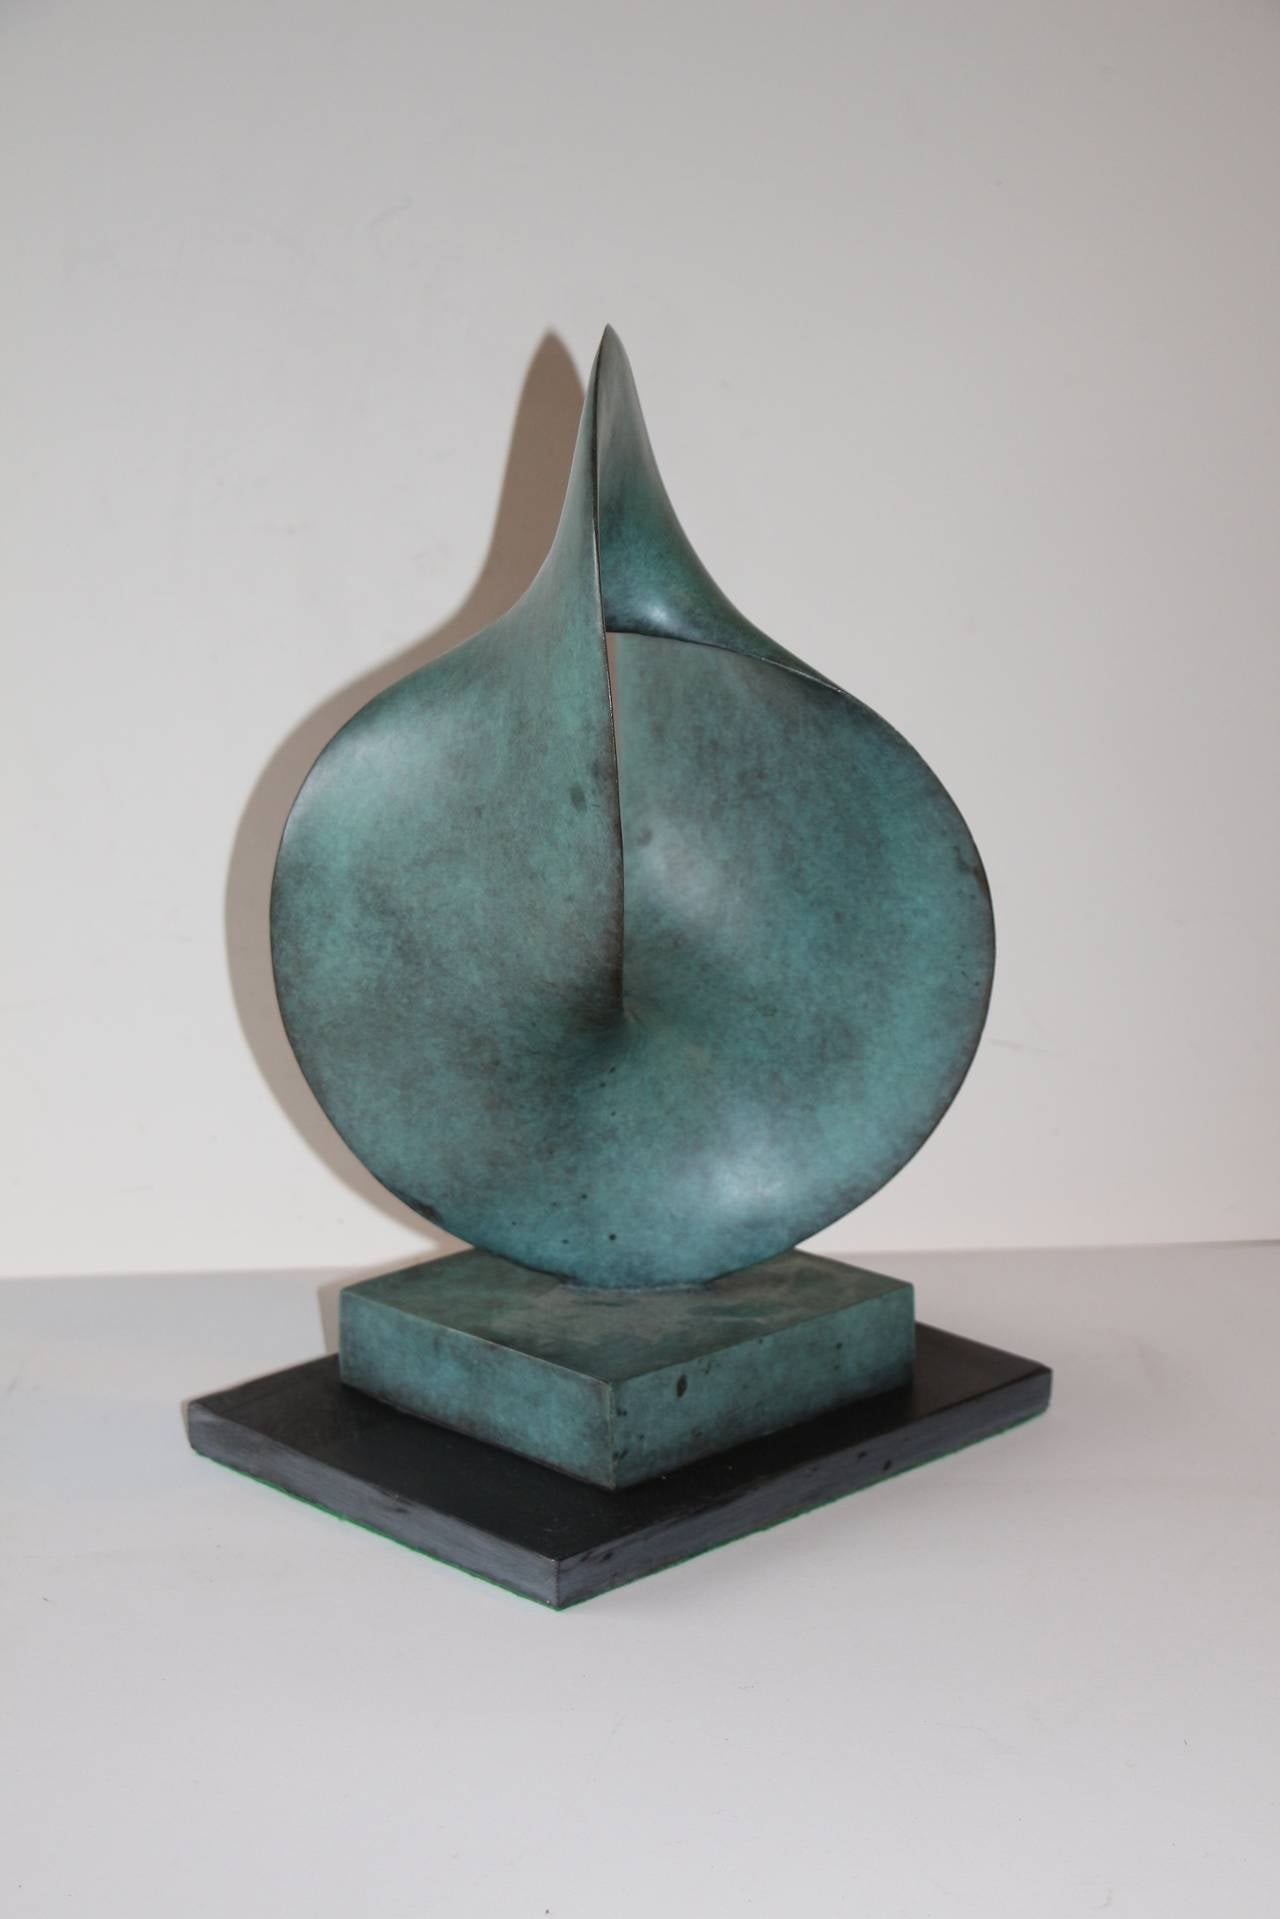 American Fred Schumm Bronze Noted NJ Artist Signed, Dated 1989 For Sale